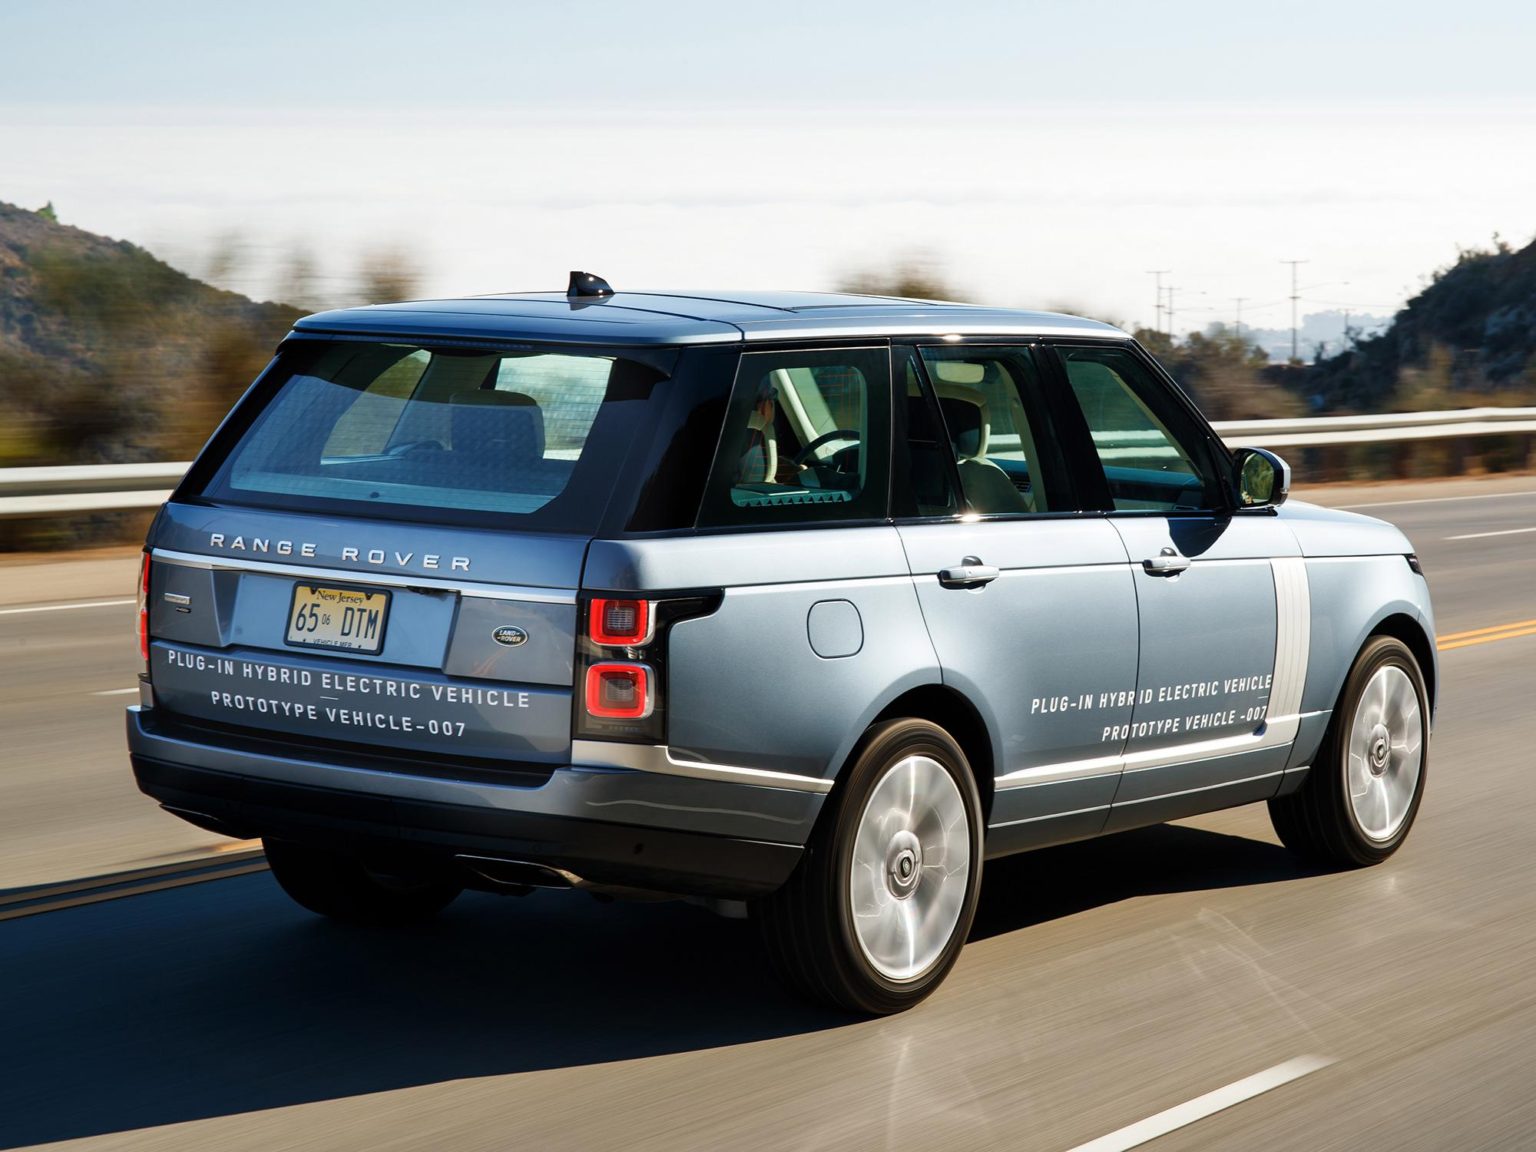 Land Rover currently offers a plug-in electric variant of its Range Rover.